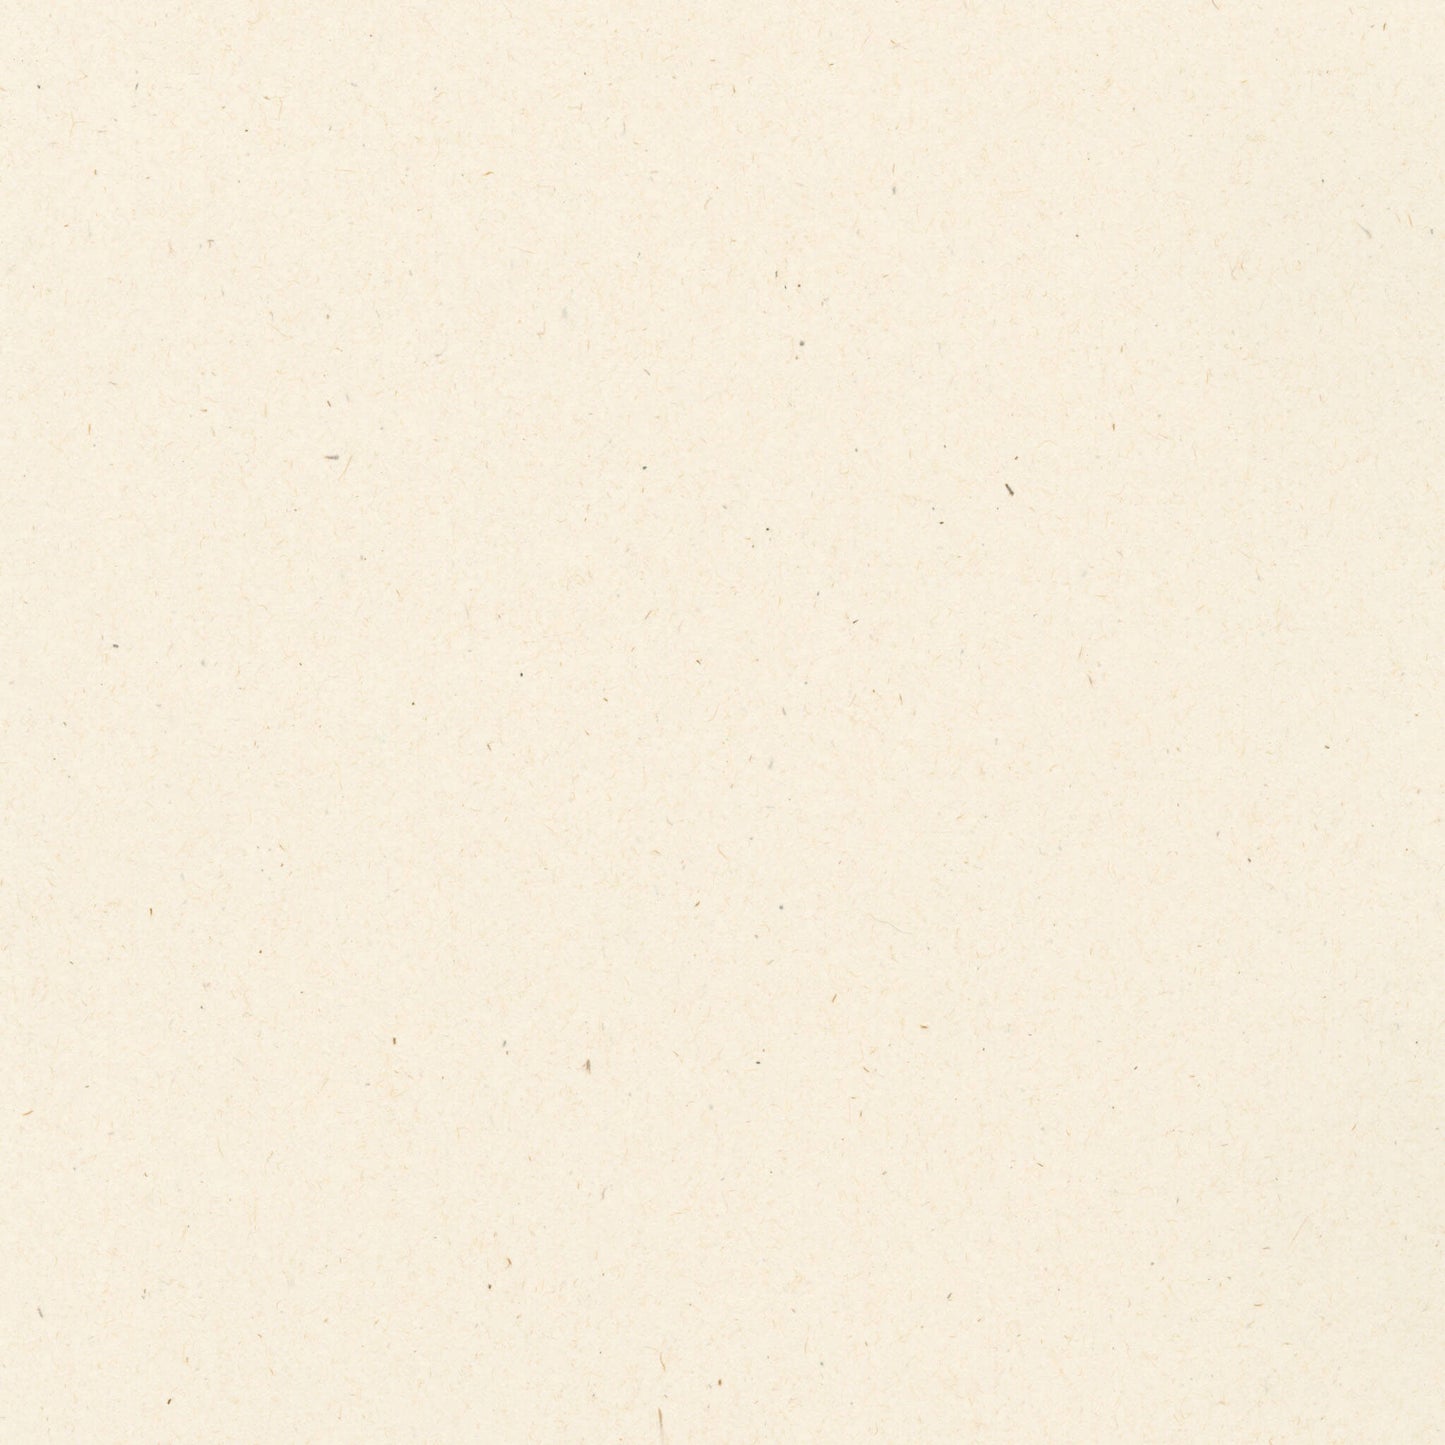 Close-up of beige speckled paper texture, with a natural and organic pulp-like appearance.